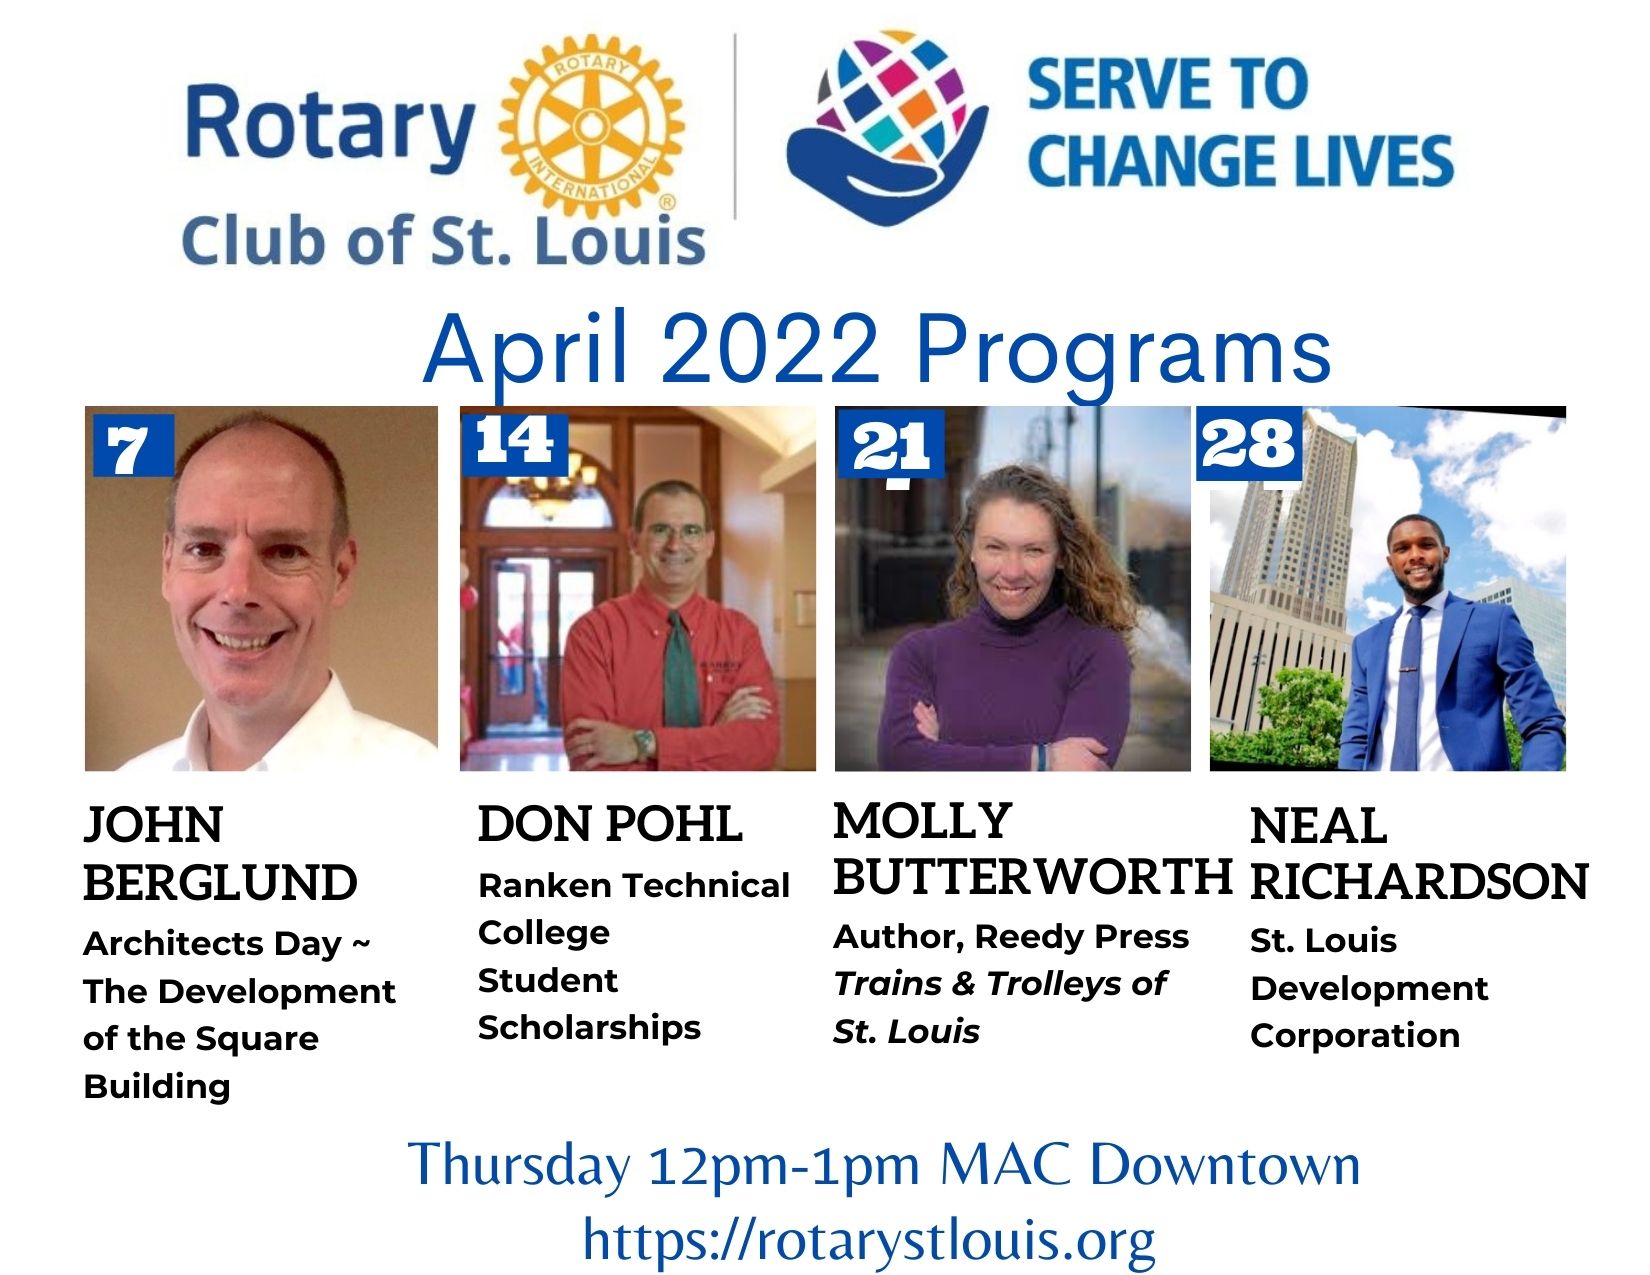 List of April 2022 Programs at St. Louis Rotary Club